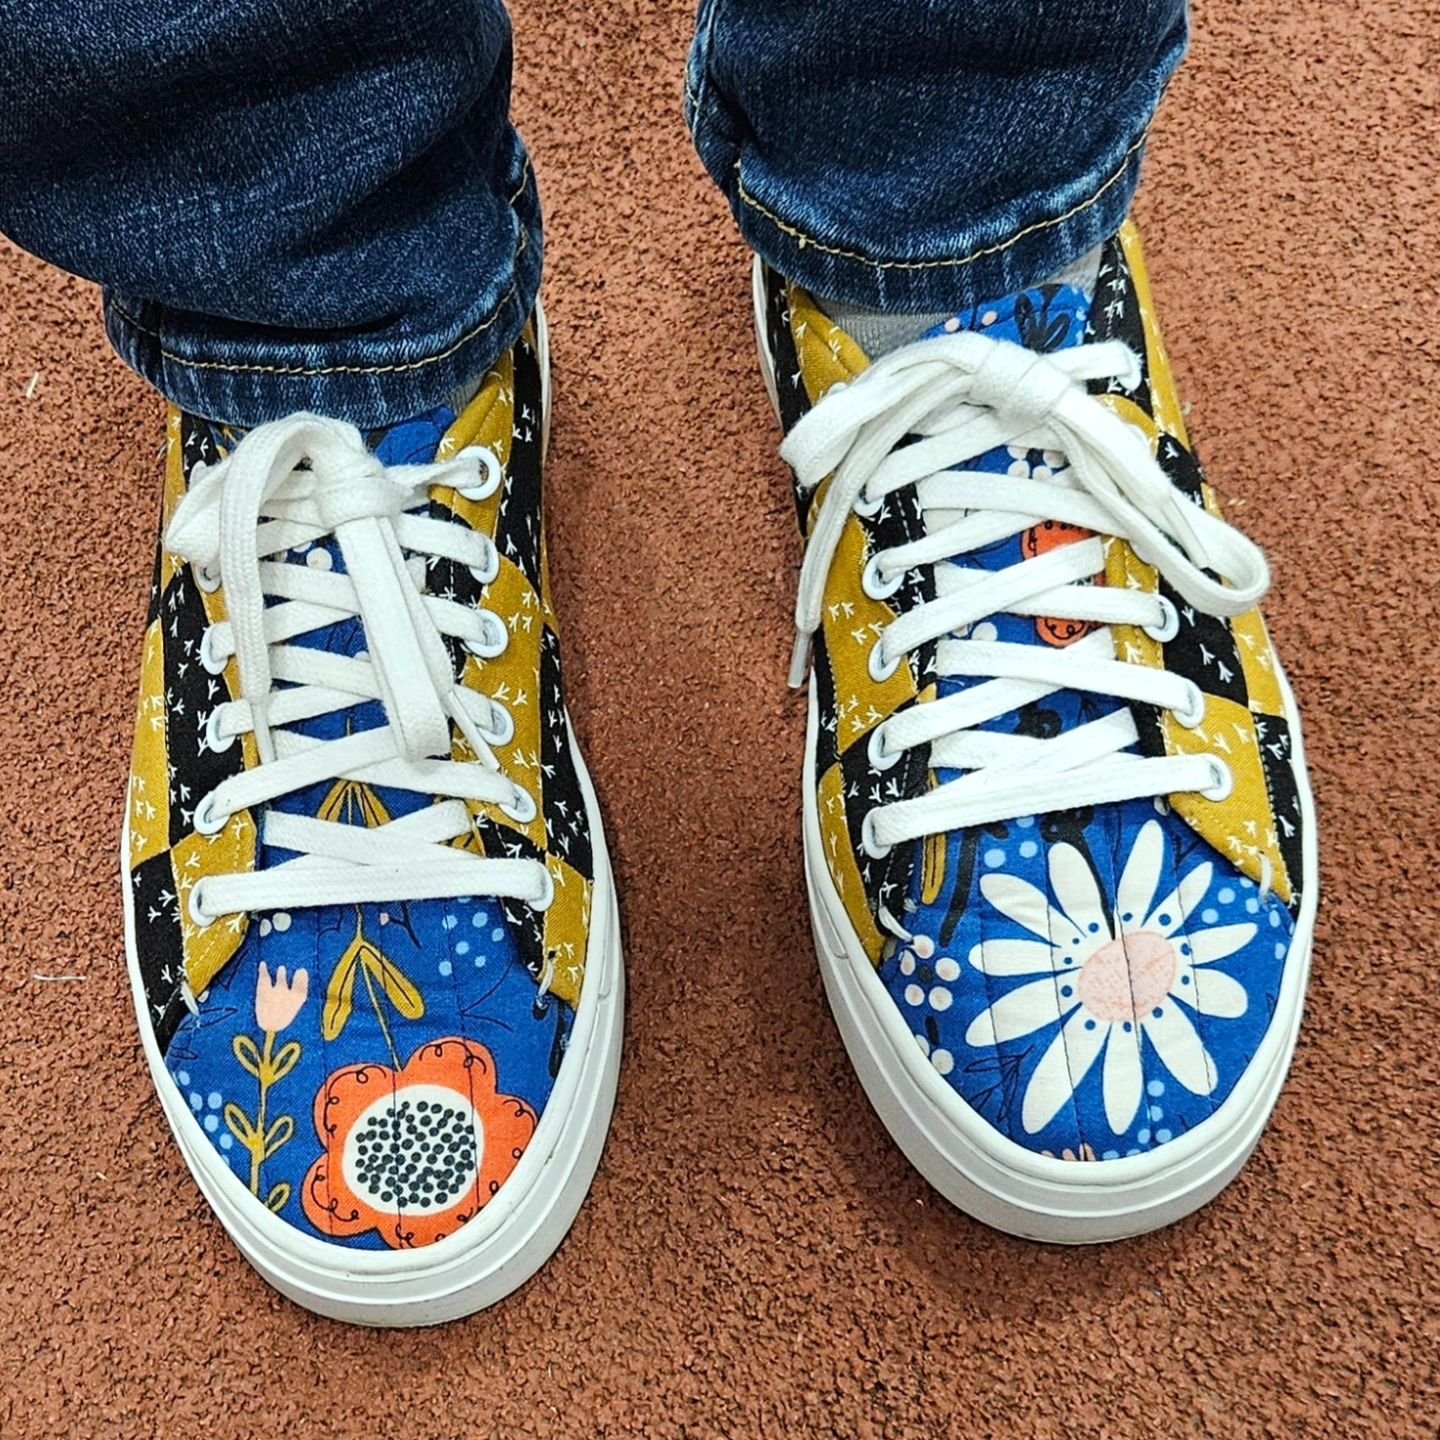 Quilted Sneakers in the wild! Come see us today and tomorrow at the Genessee Valley Quilt Show in Rochester  NY--and keep your eye out for other beautiful #quiltedsneakers on the show floor! And of course, we have our vendor space chock-full of bette